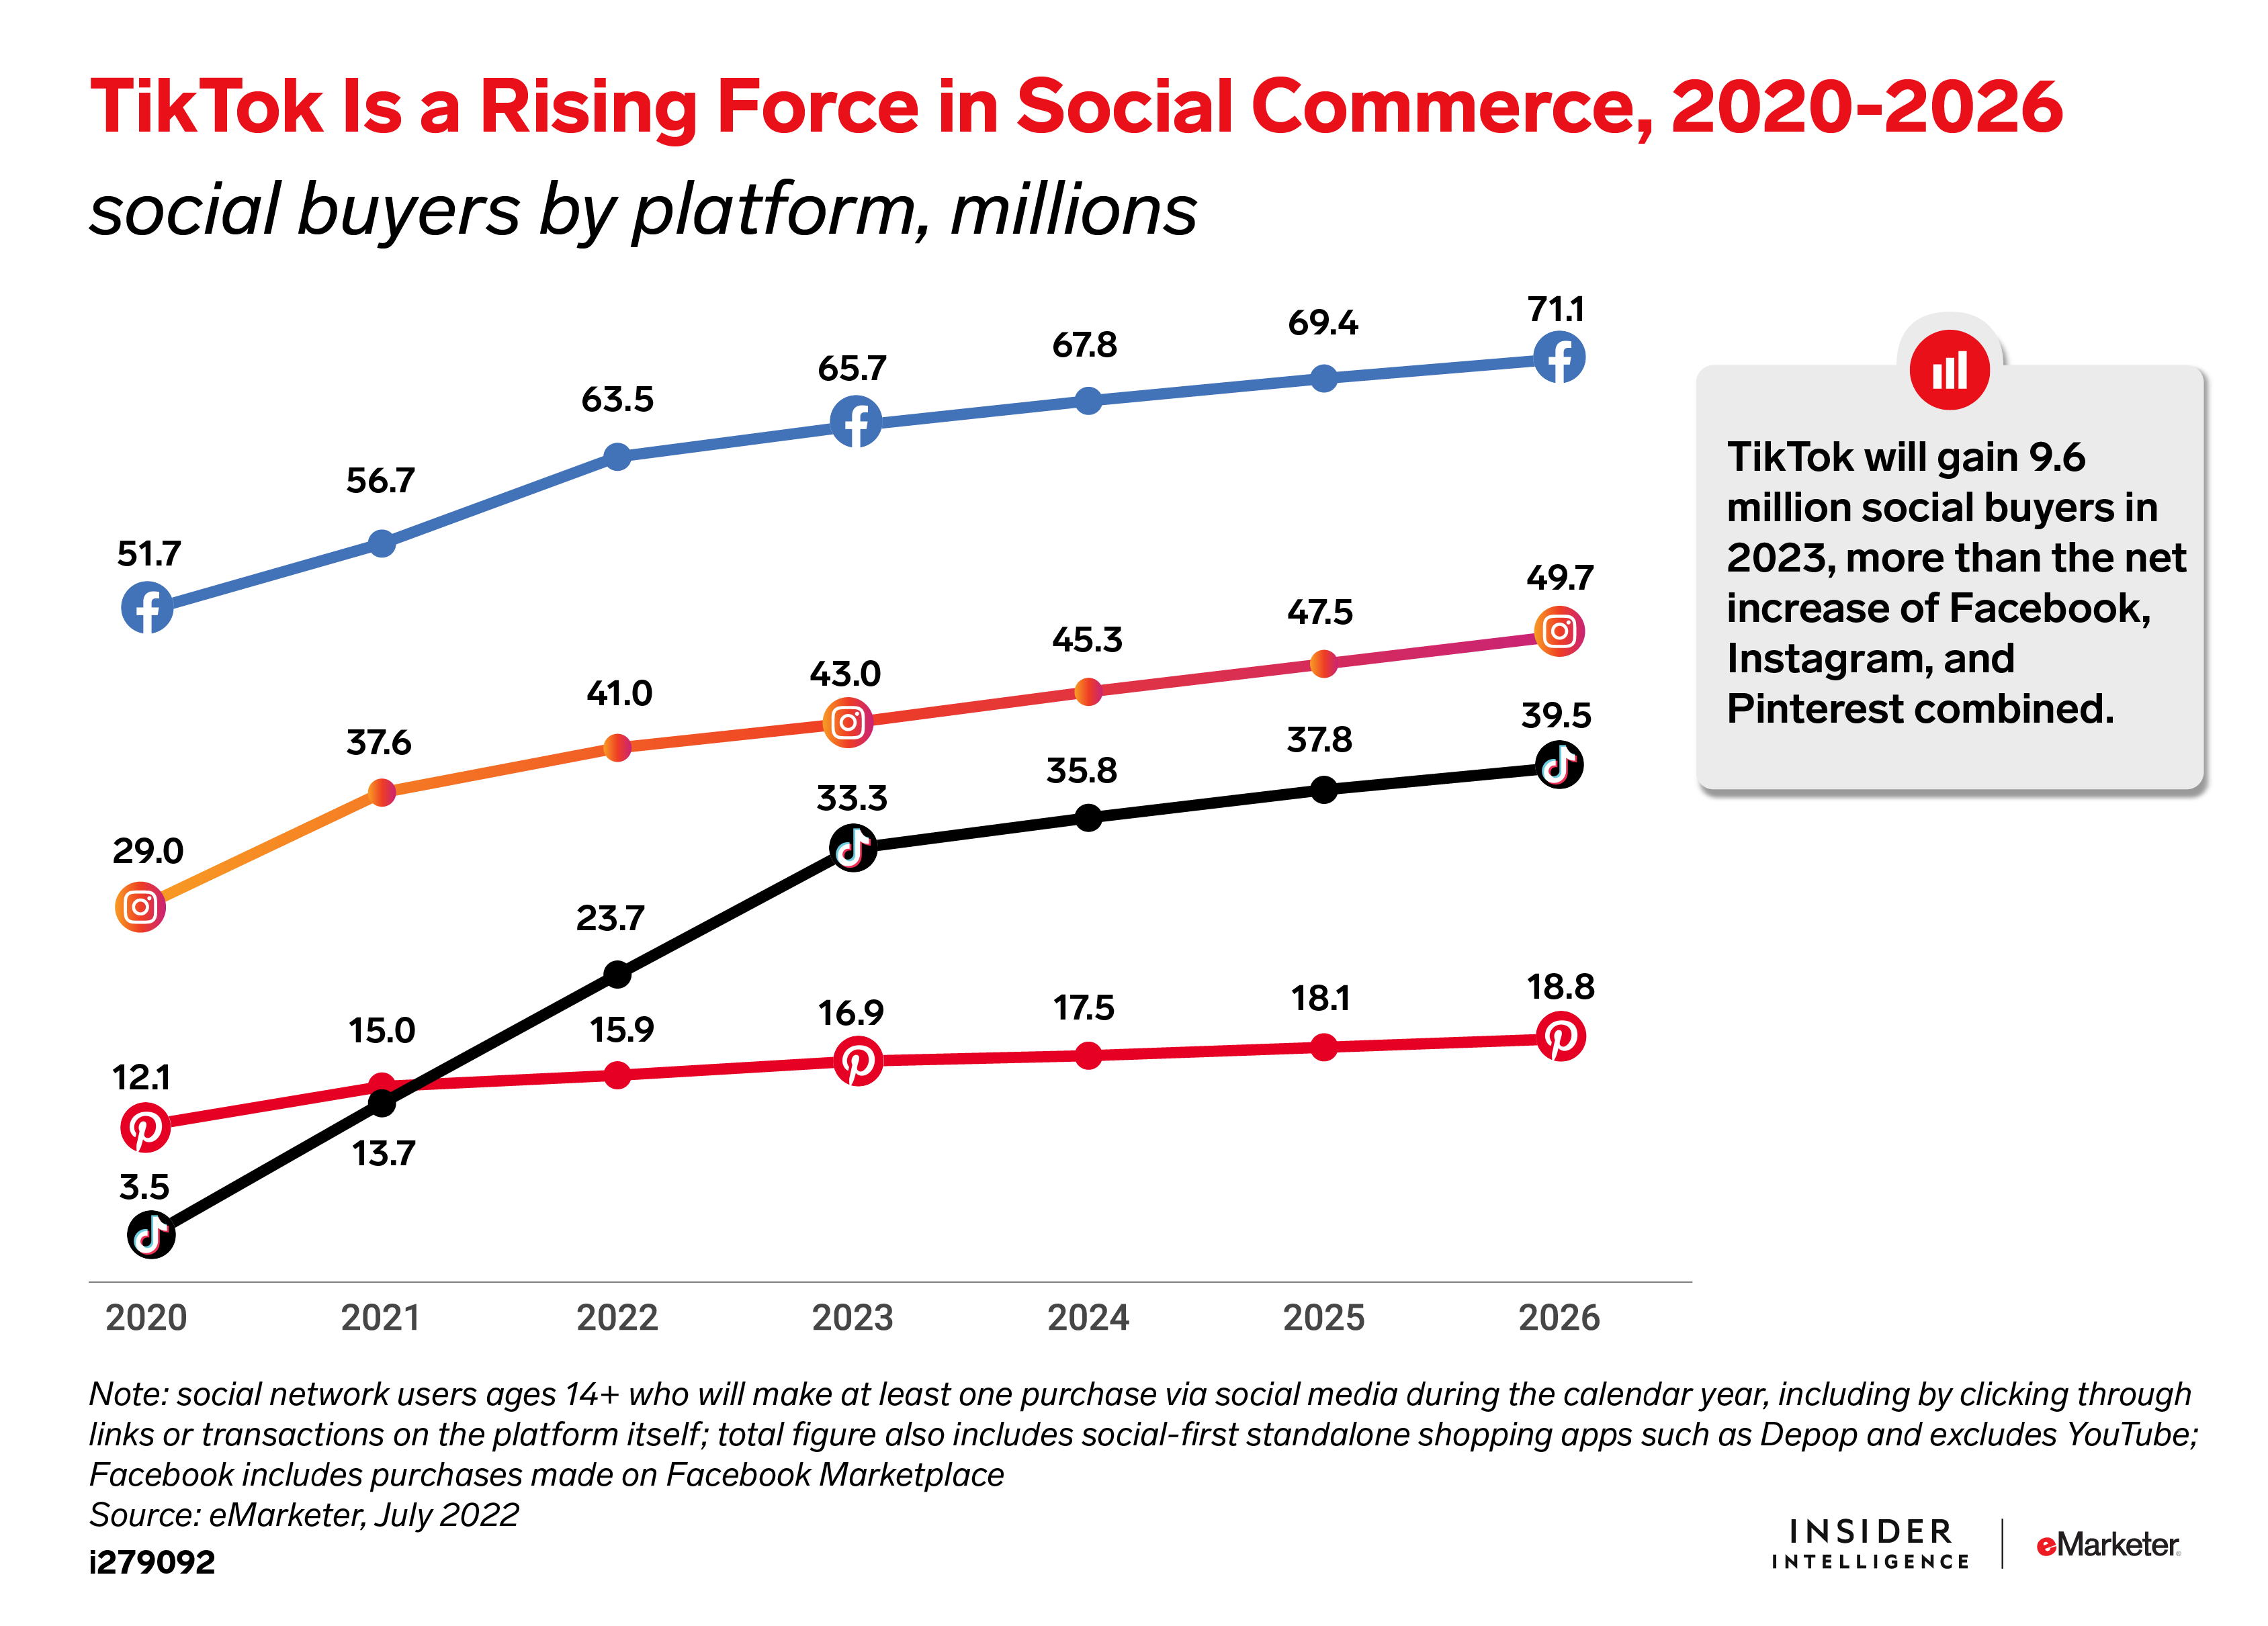 TikTok Is a Rising Force in Social Commerce, 2020-2026 (social buyers by platform, millions)